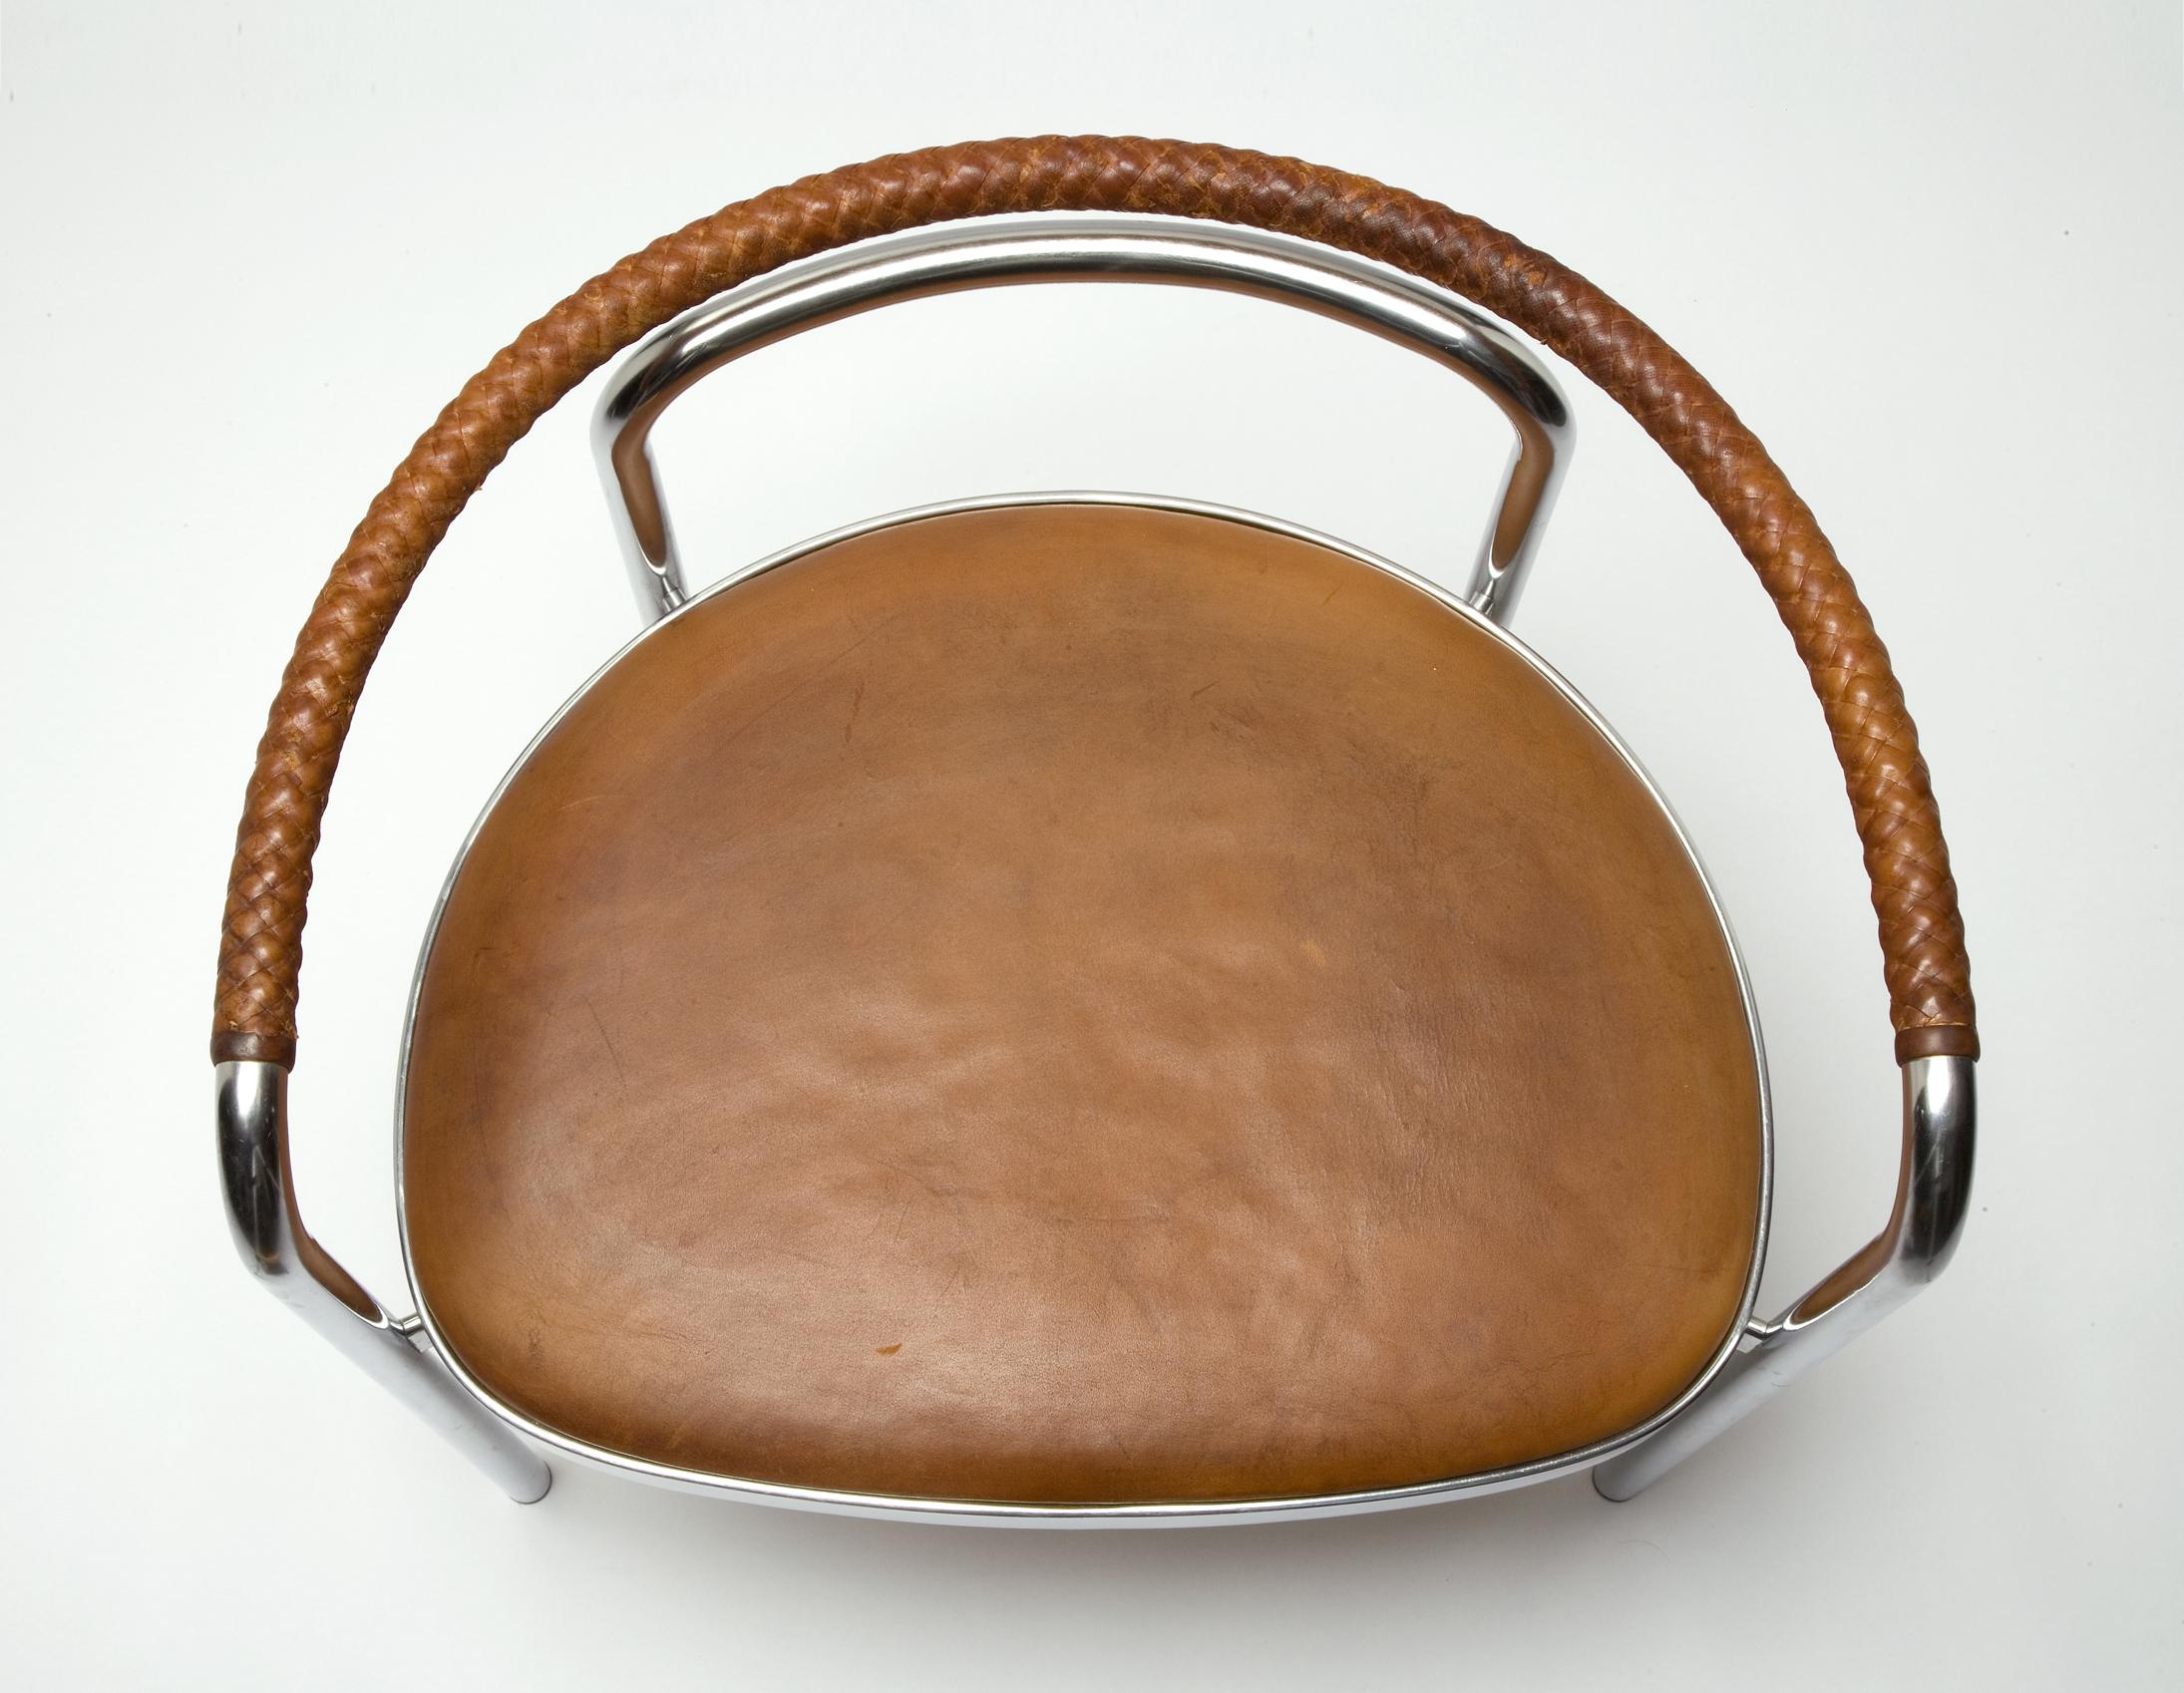 PK 12 Chair in Braided Brown Leather and Stainless Steel by Poul Kjaerholm, 1964 For Sale 1